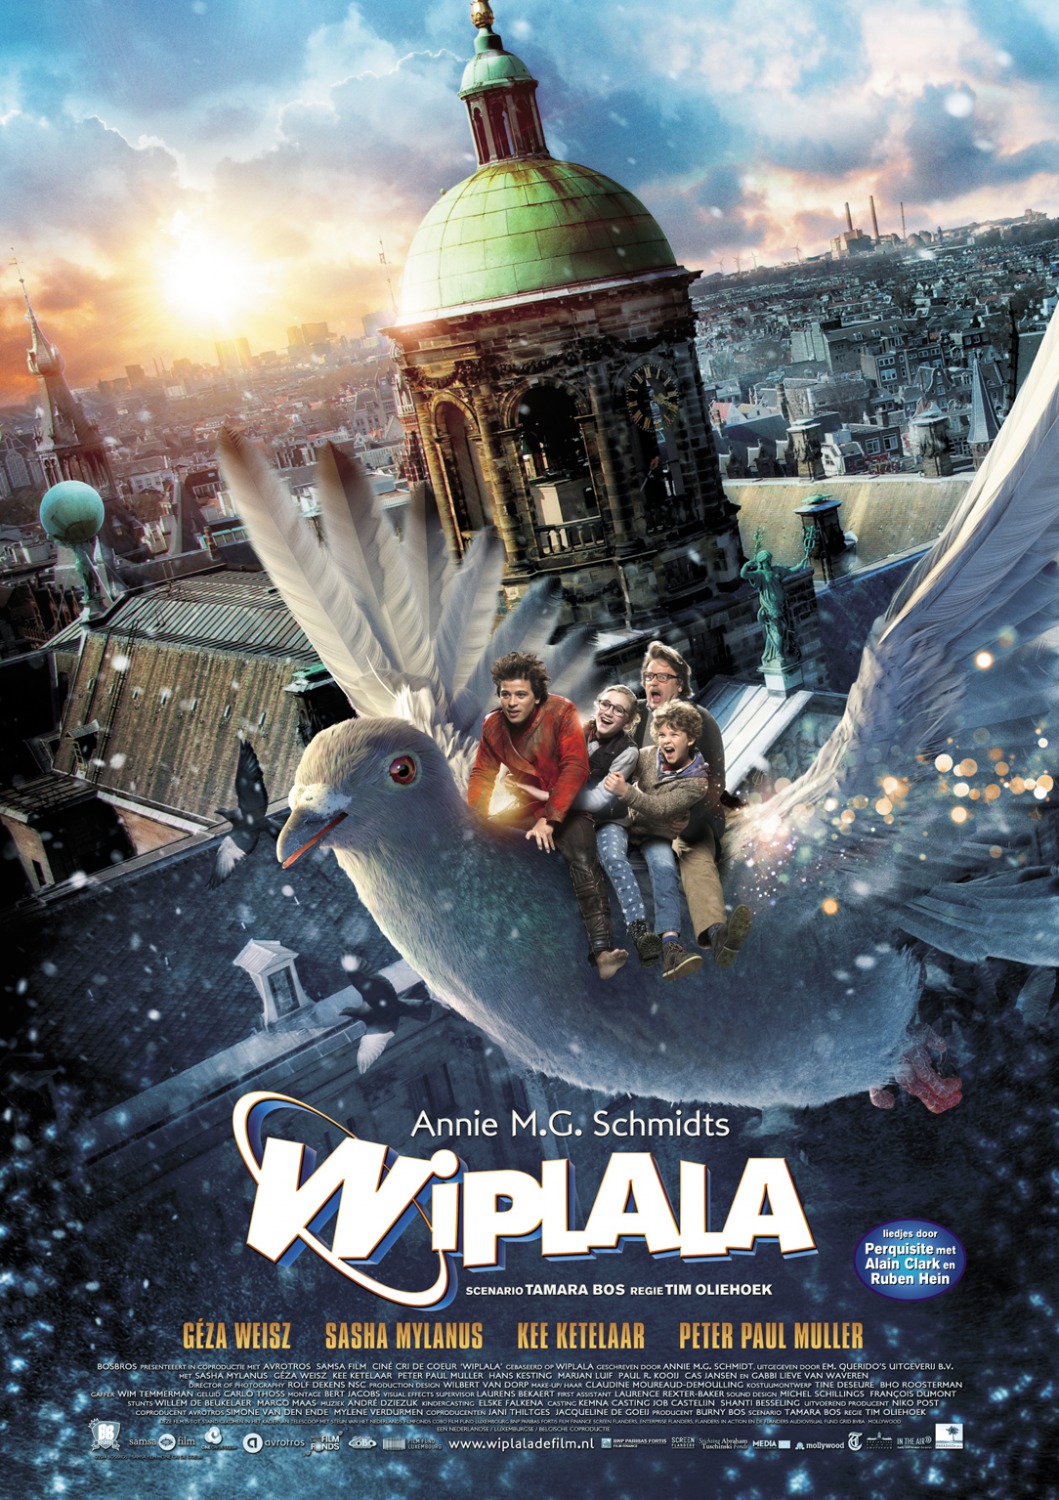 Extra Large Movie Poster Image for Wiplala 